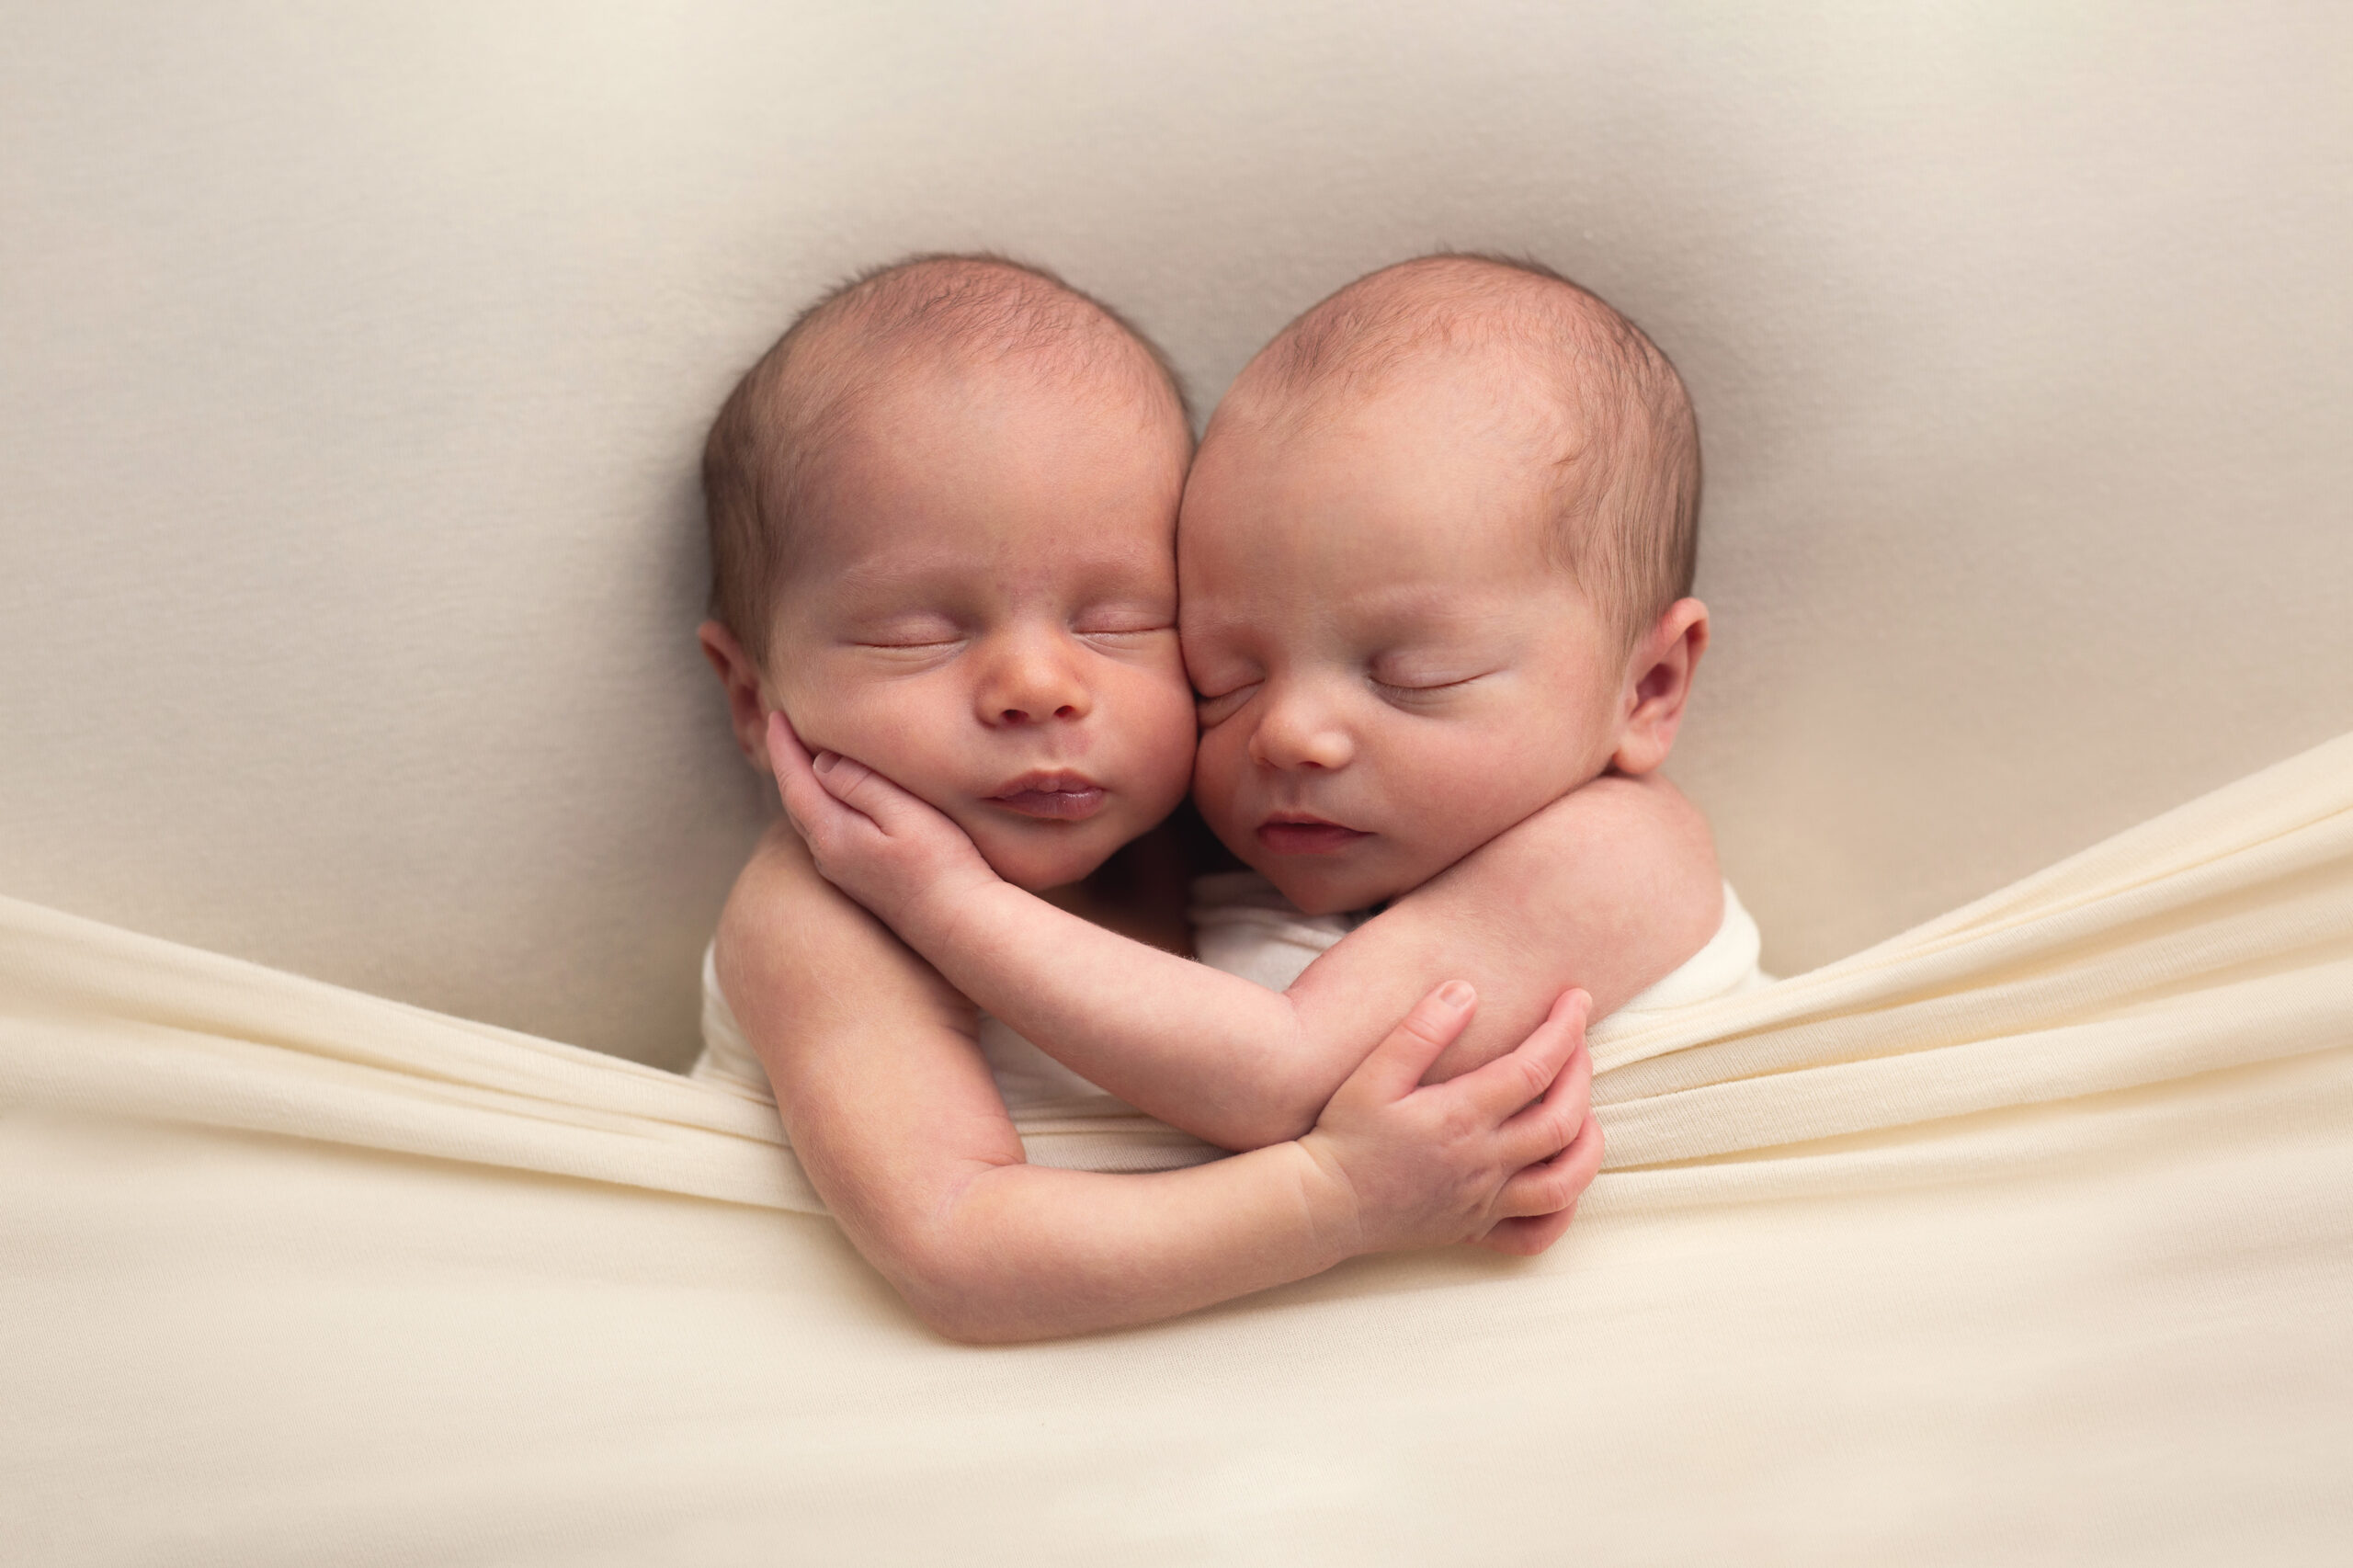 Twin newborns tucked in on ivory coloured sheets snuggling together with their arms around each other